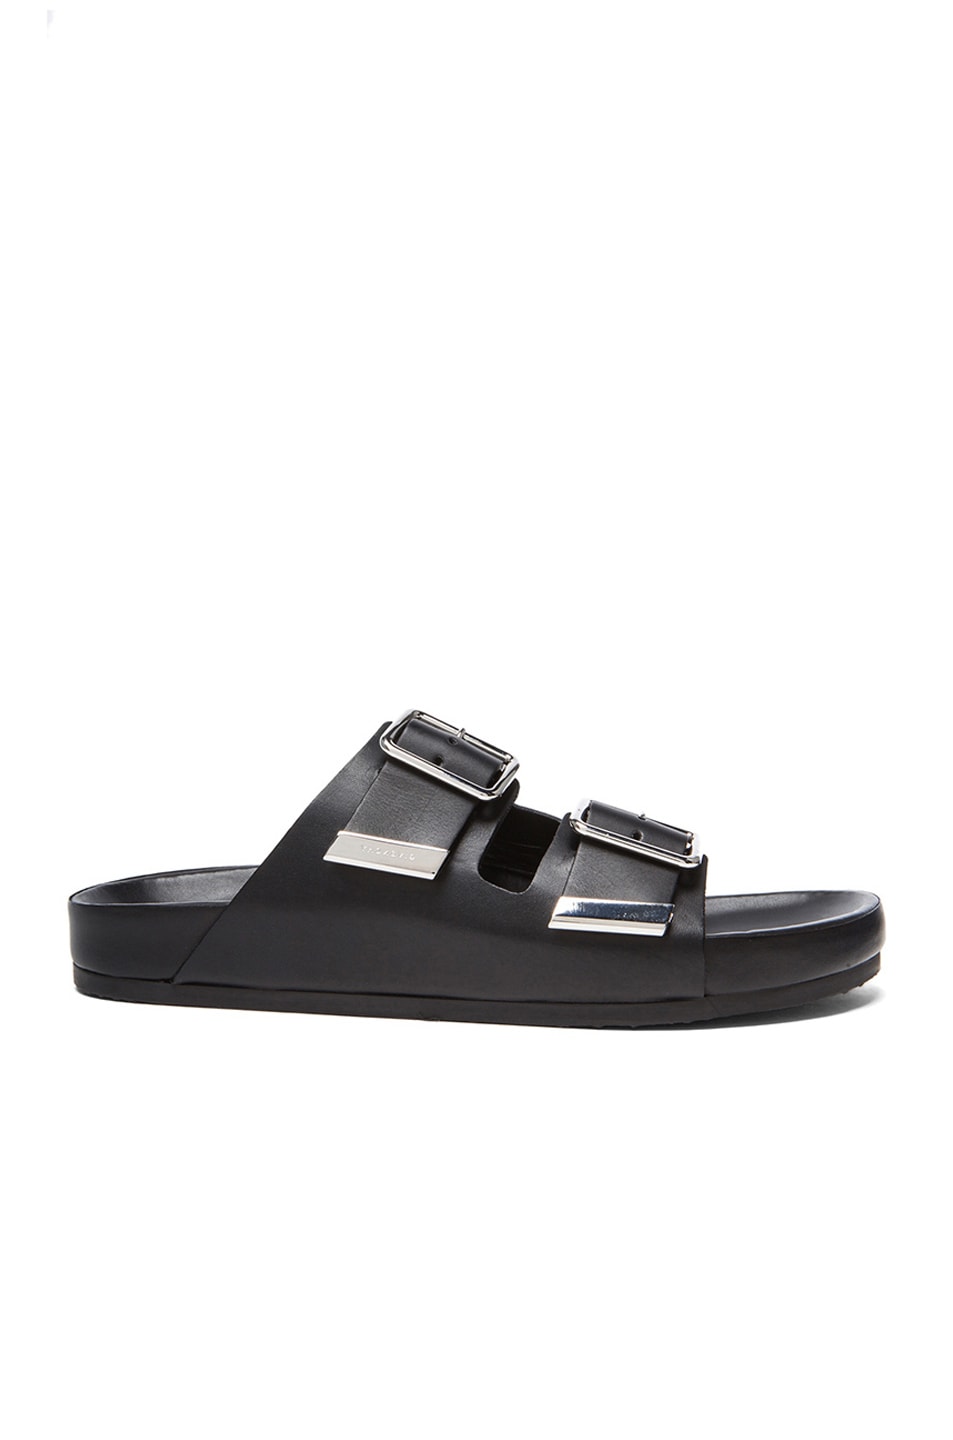 Givenchy Barka Casual Calfskin Leather Sandals in Black | FWRD